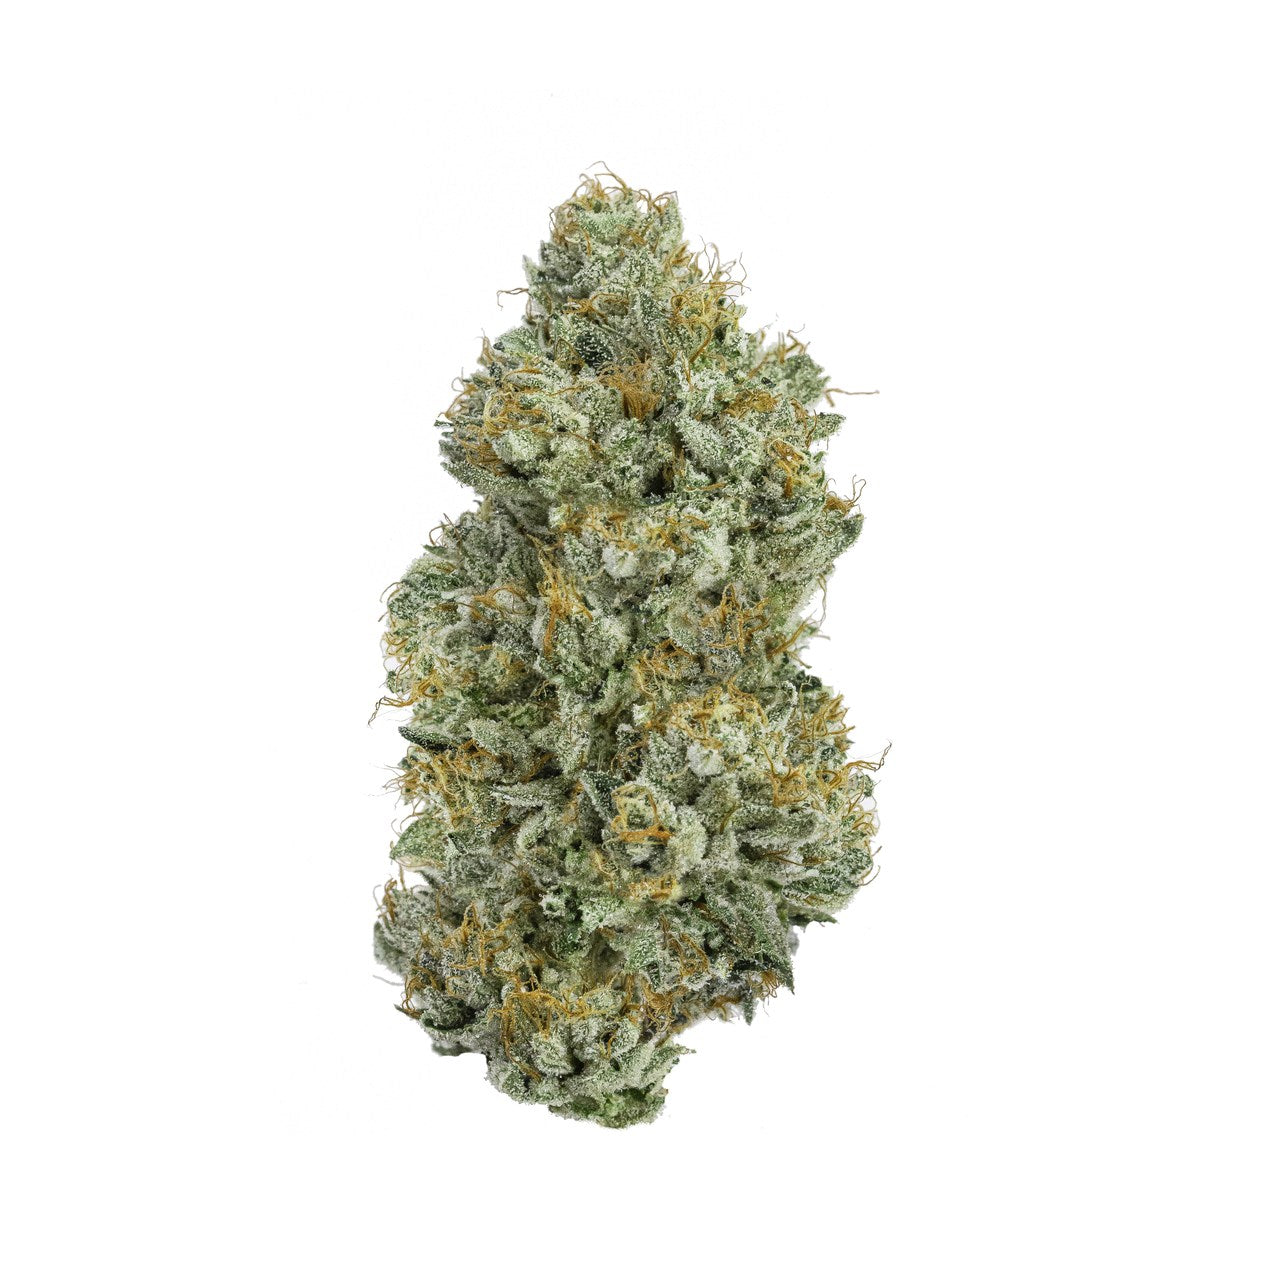 A bright green nug of cannabis flower from the Cherry Pie strain stands against a white background.